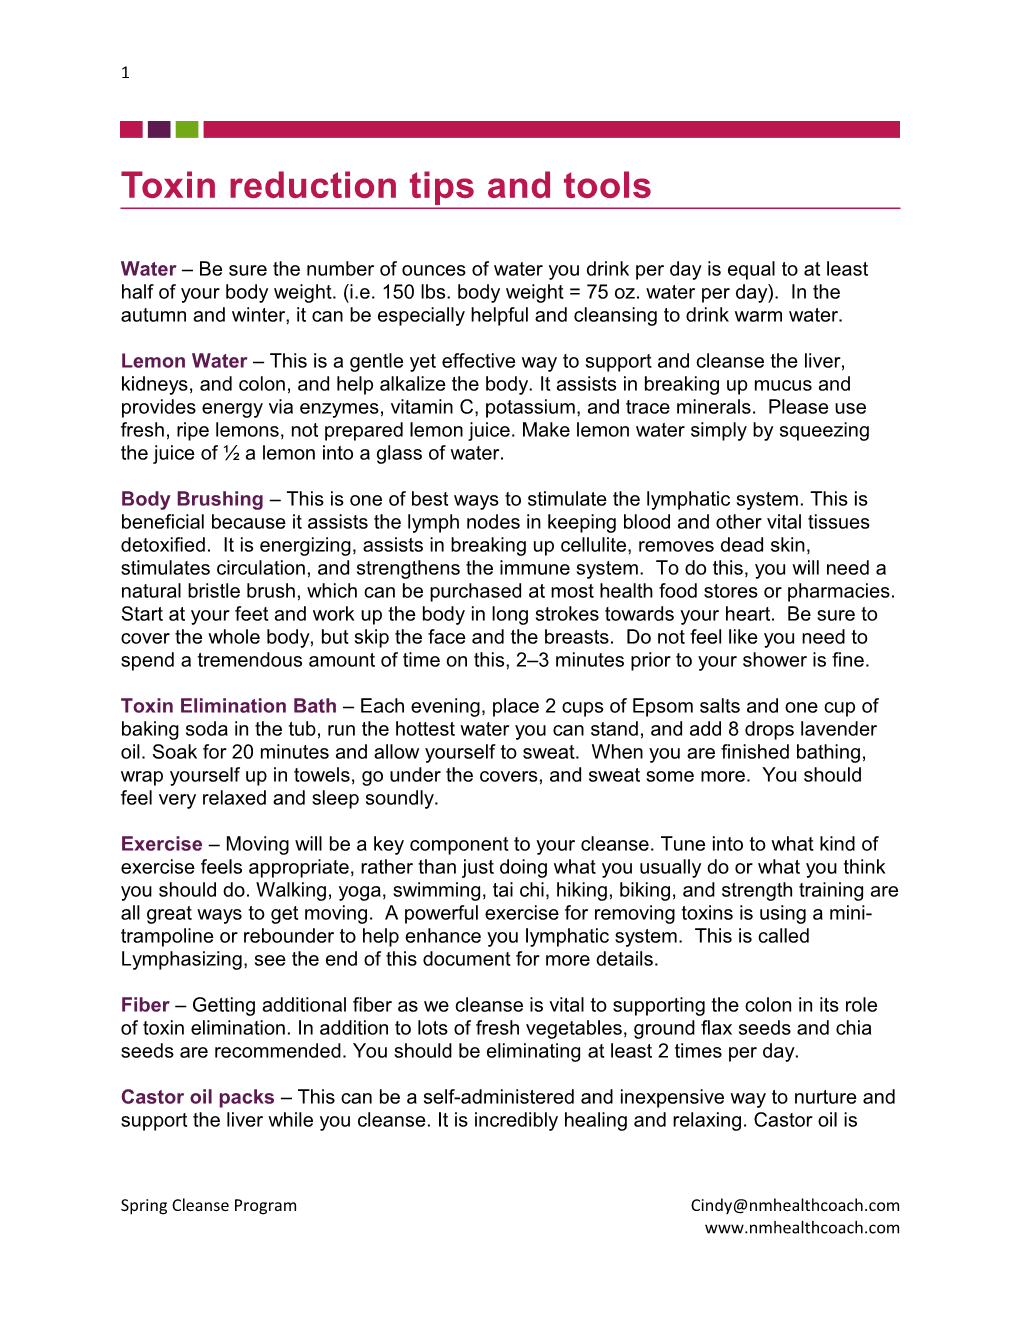 Toxin Reduction Tips and Tools